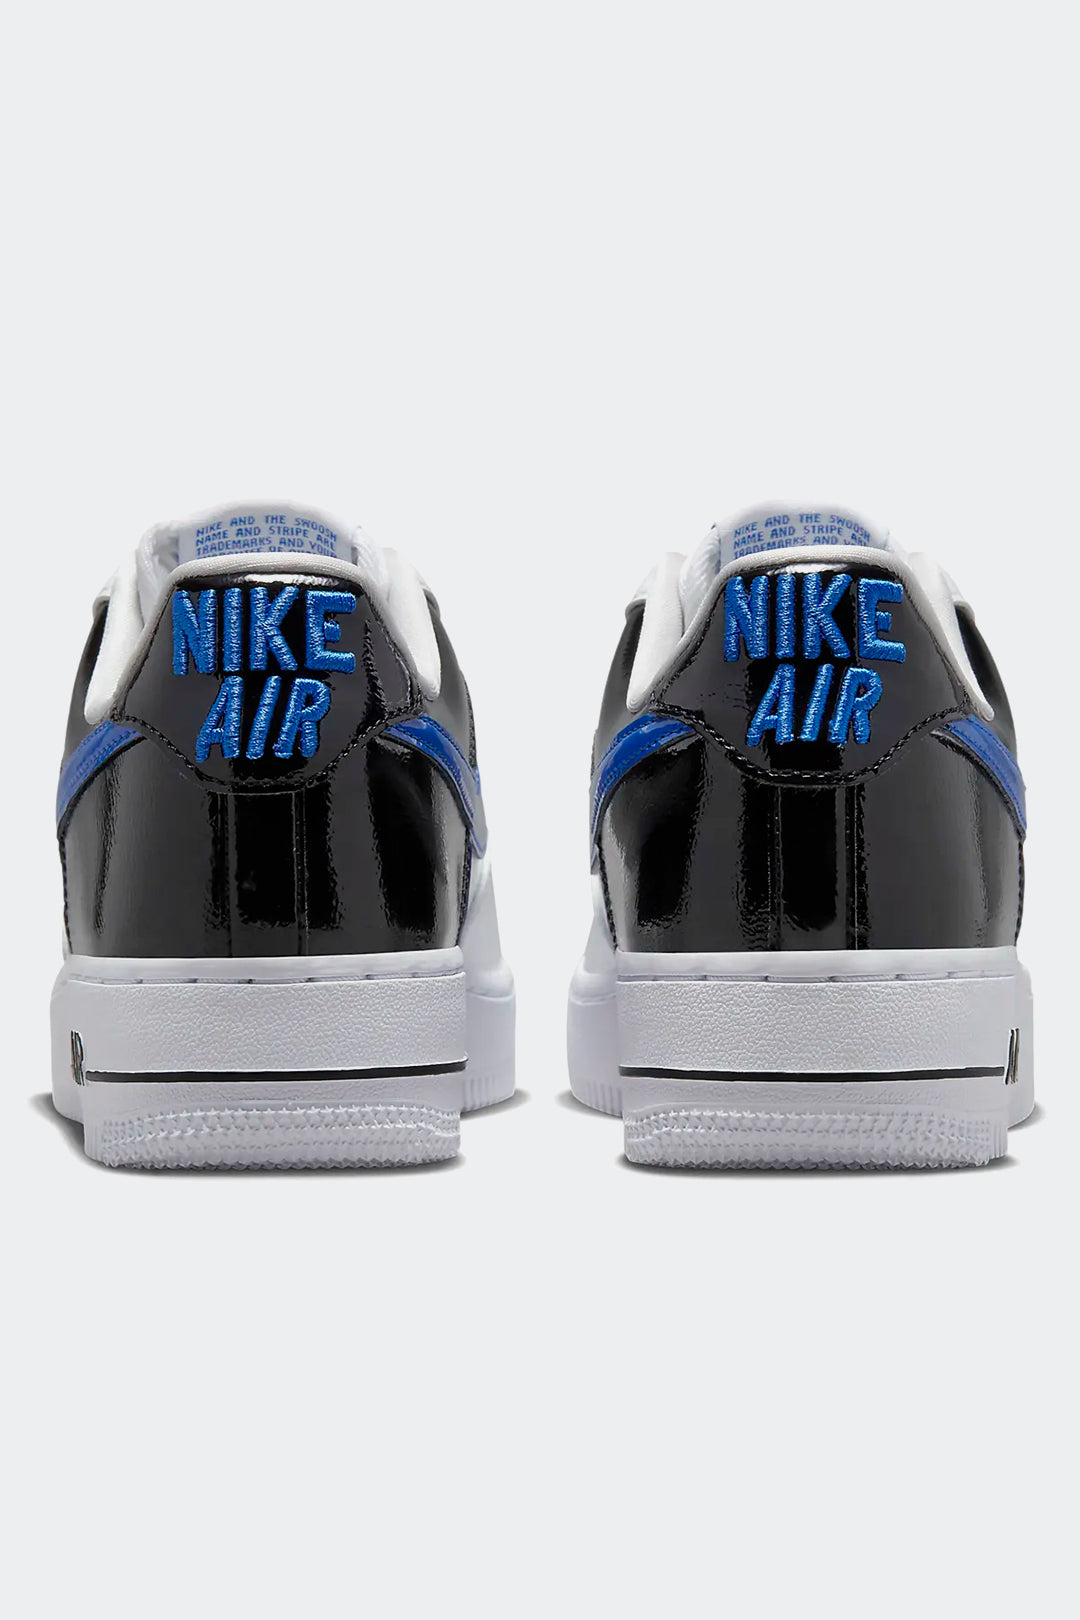 NIKE AIR FORCE 1 '07 ESS - MUJER - HYPE